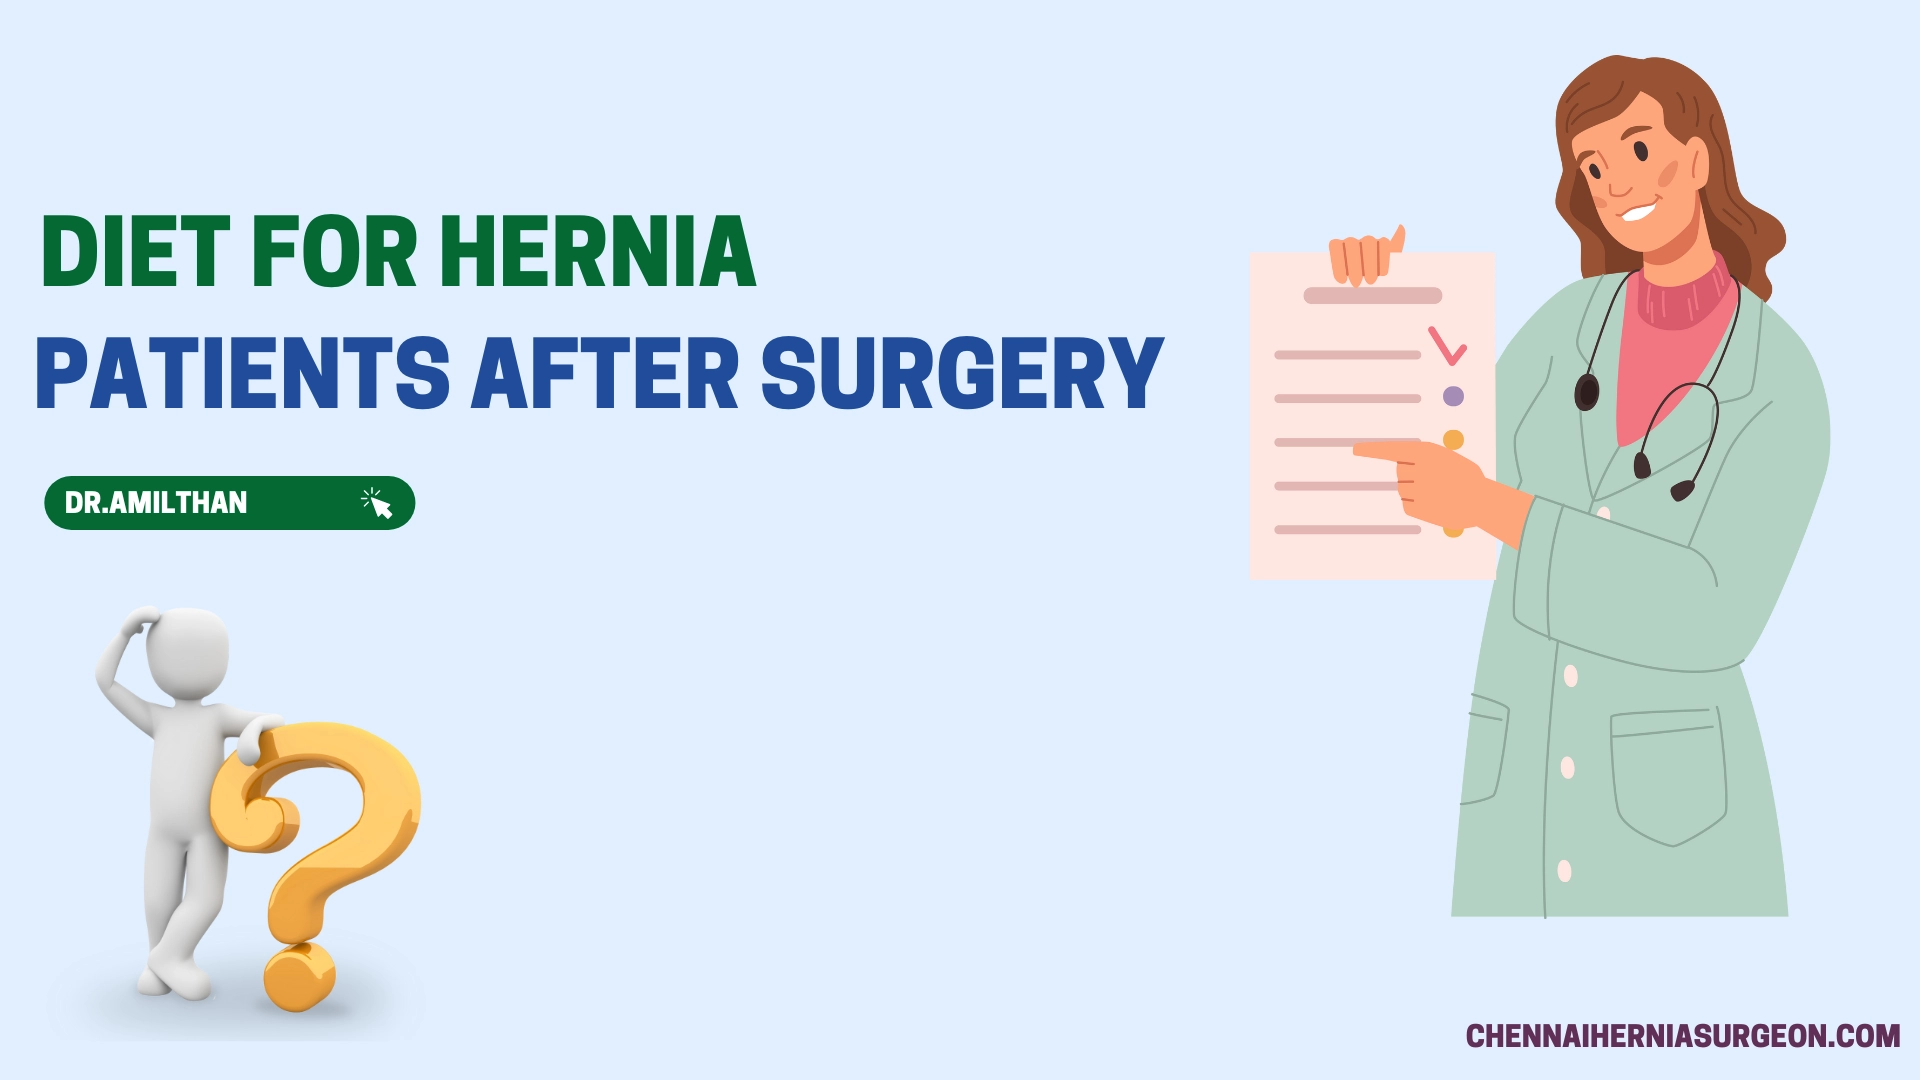 Diet For Hernia Patients After Surgery